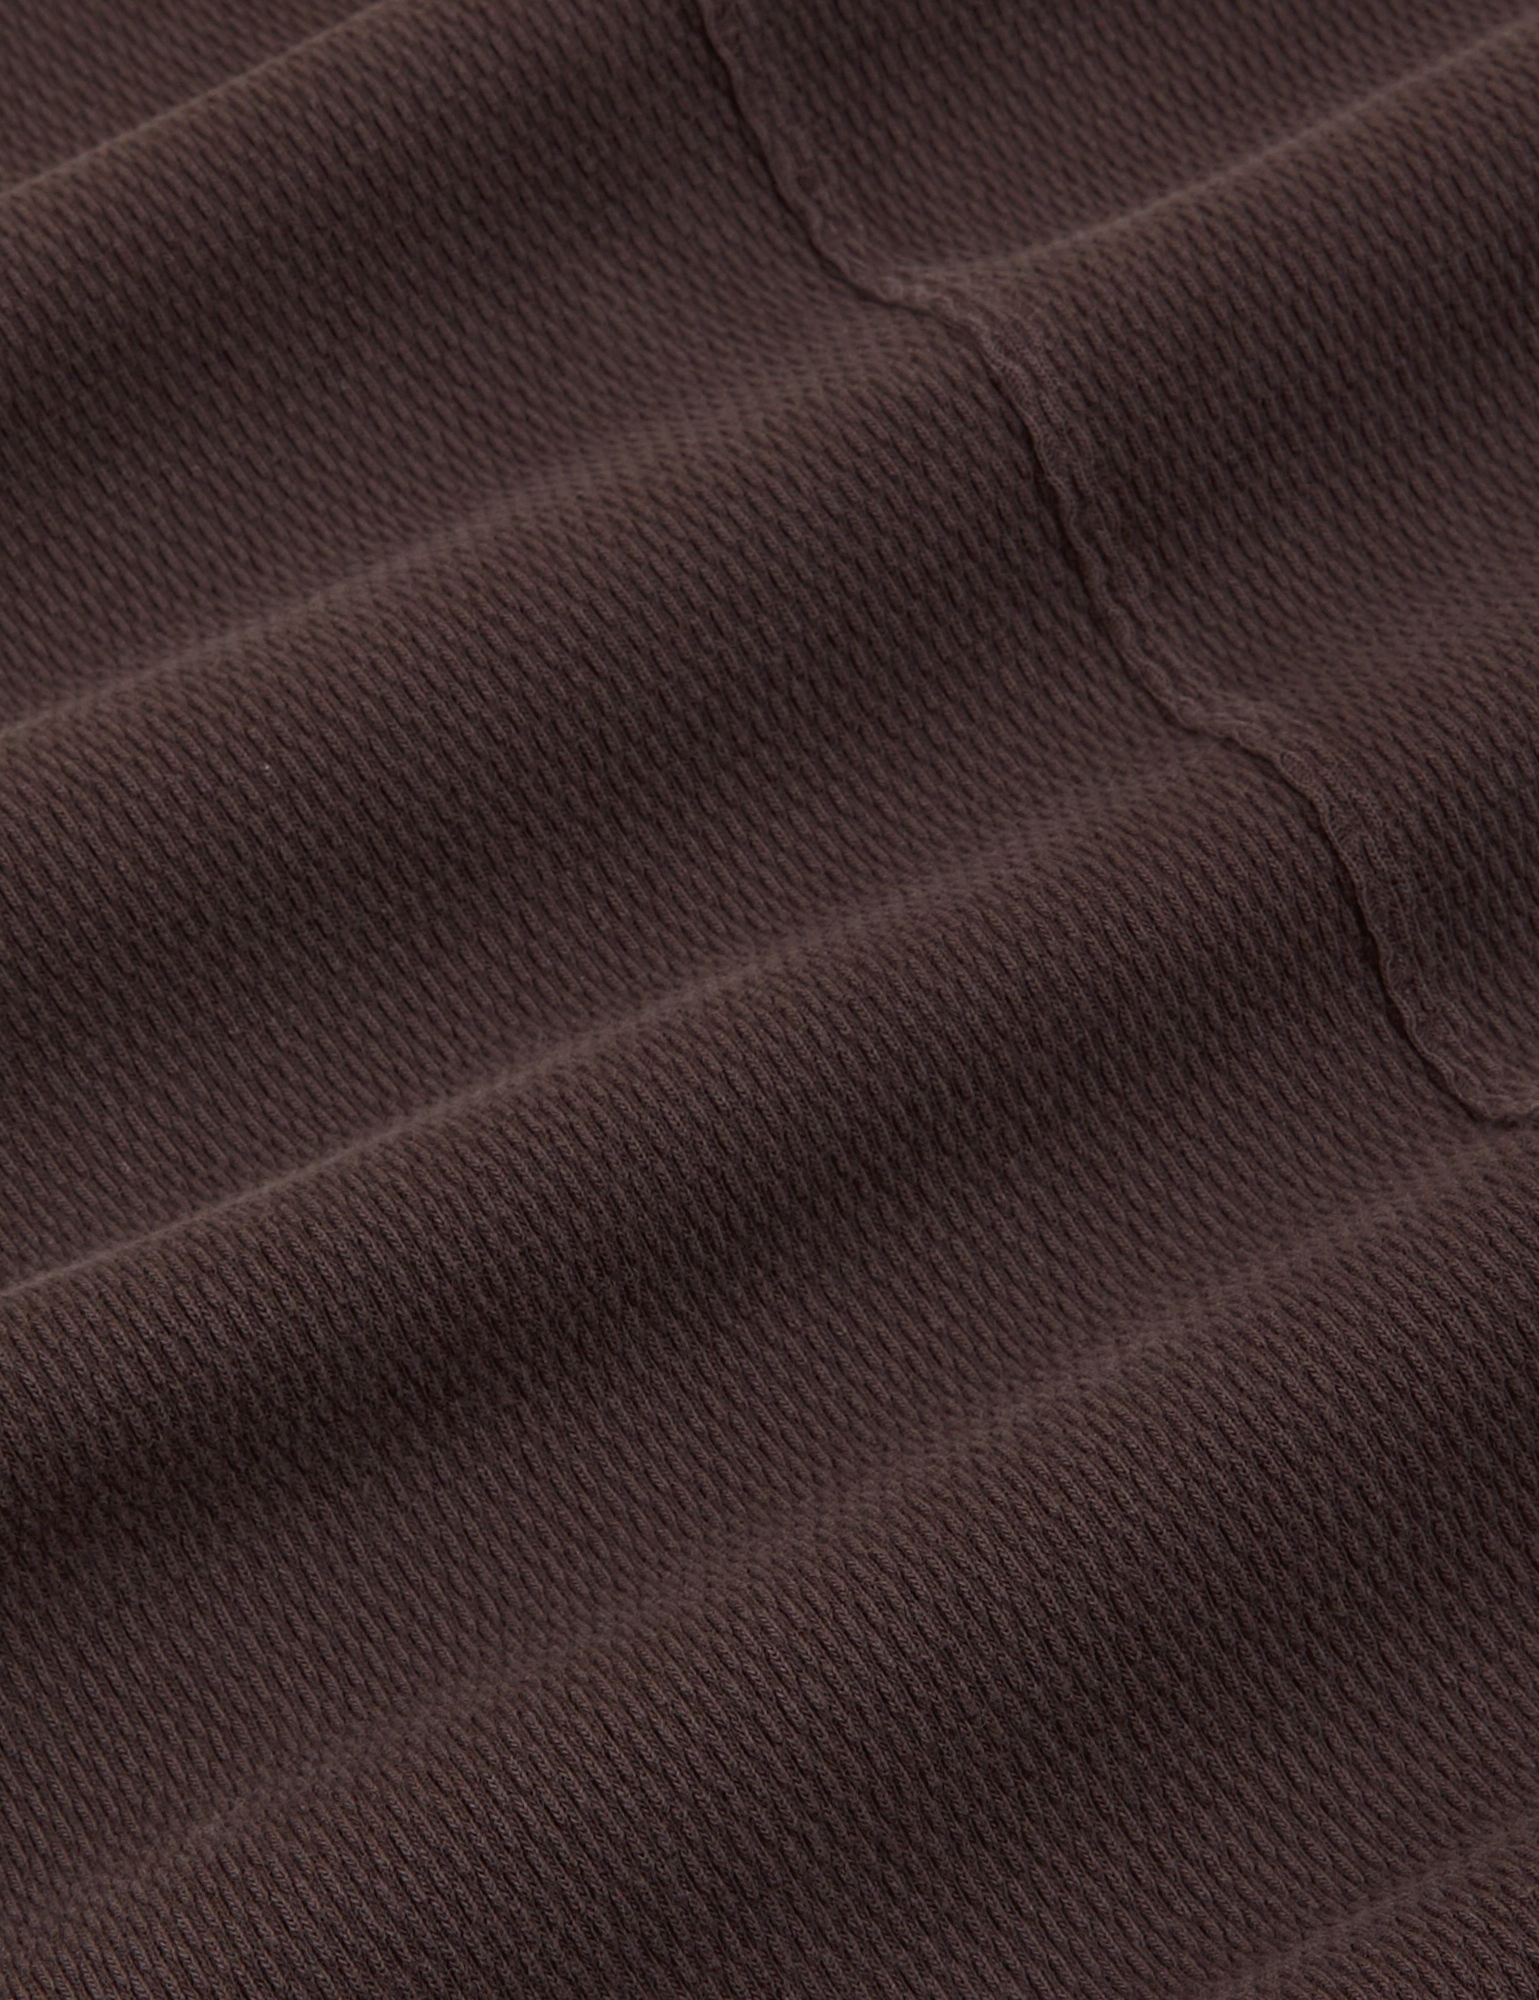 Long Sleeve Fisherman Polo in Espresso Brown fabric detail